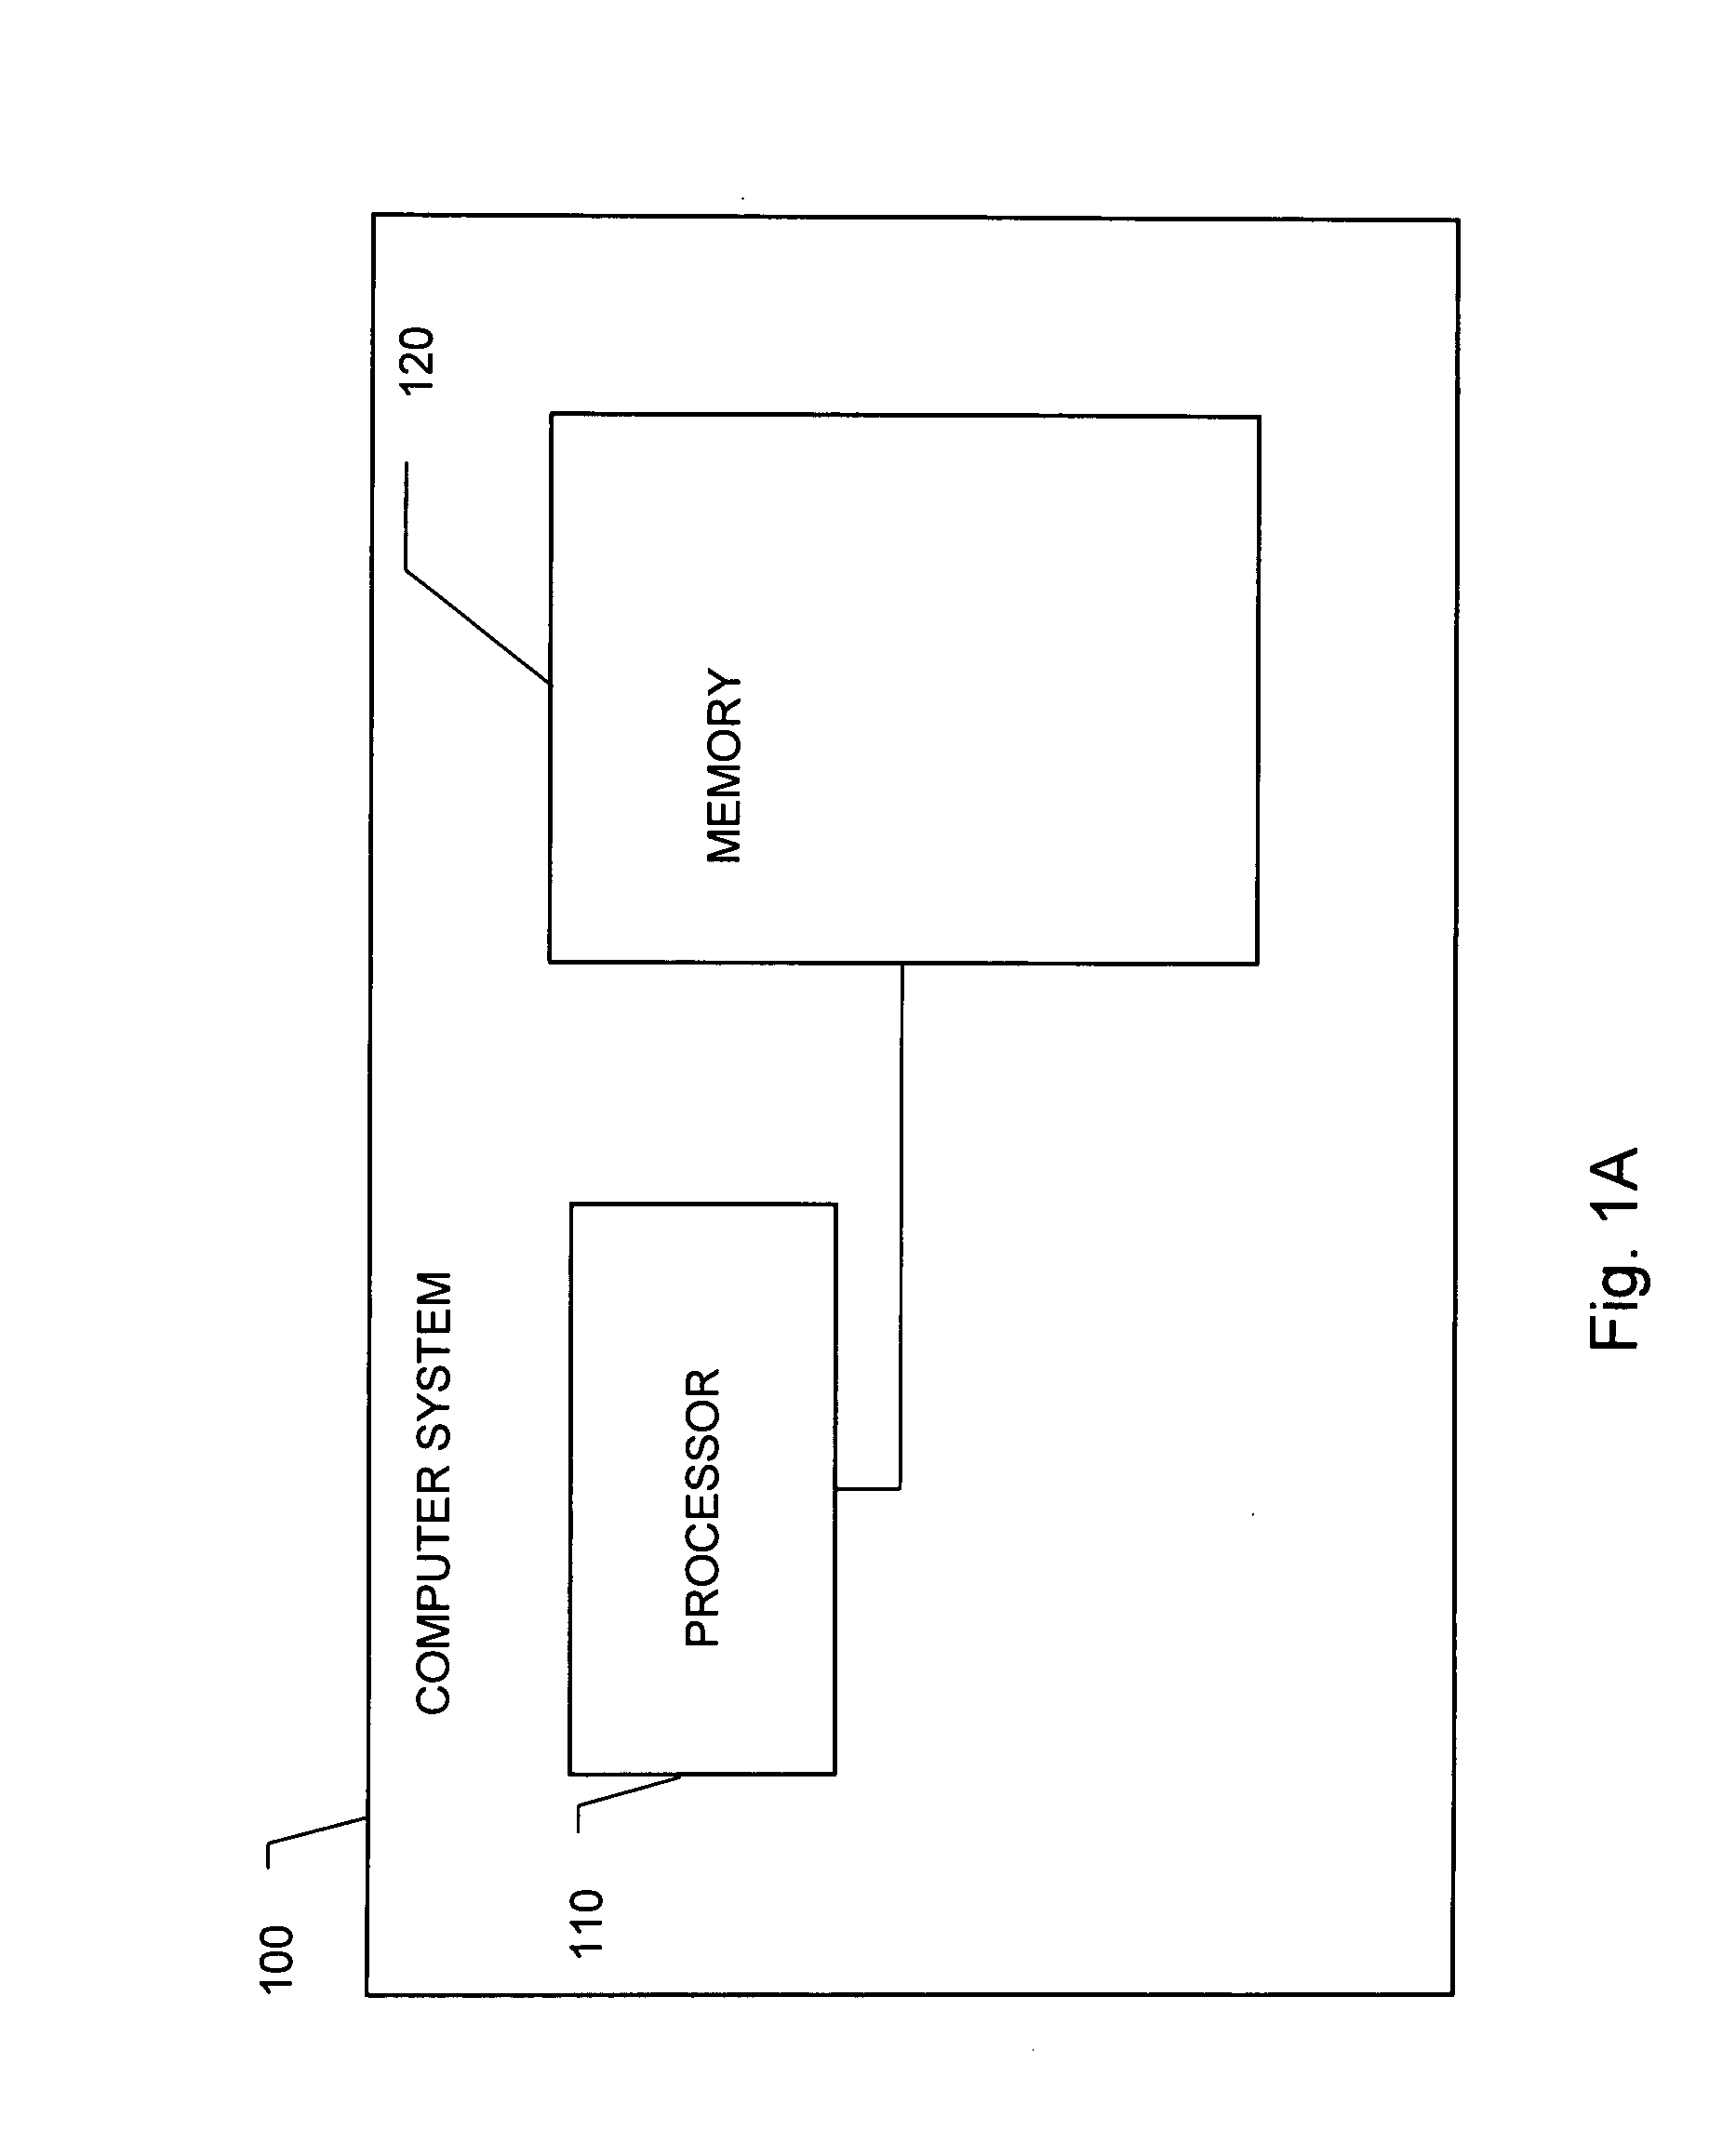 Relative positioning and access of memory objects